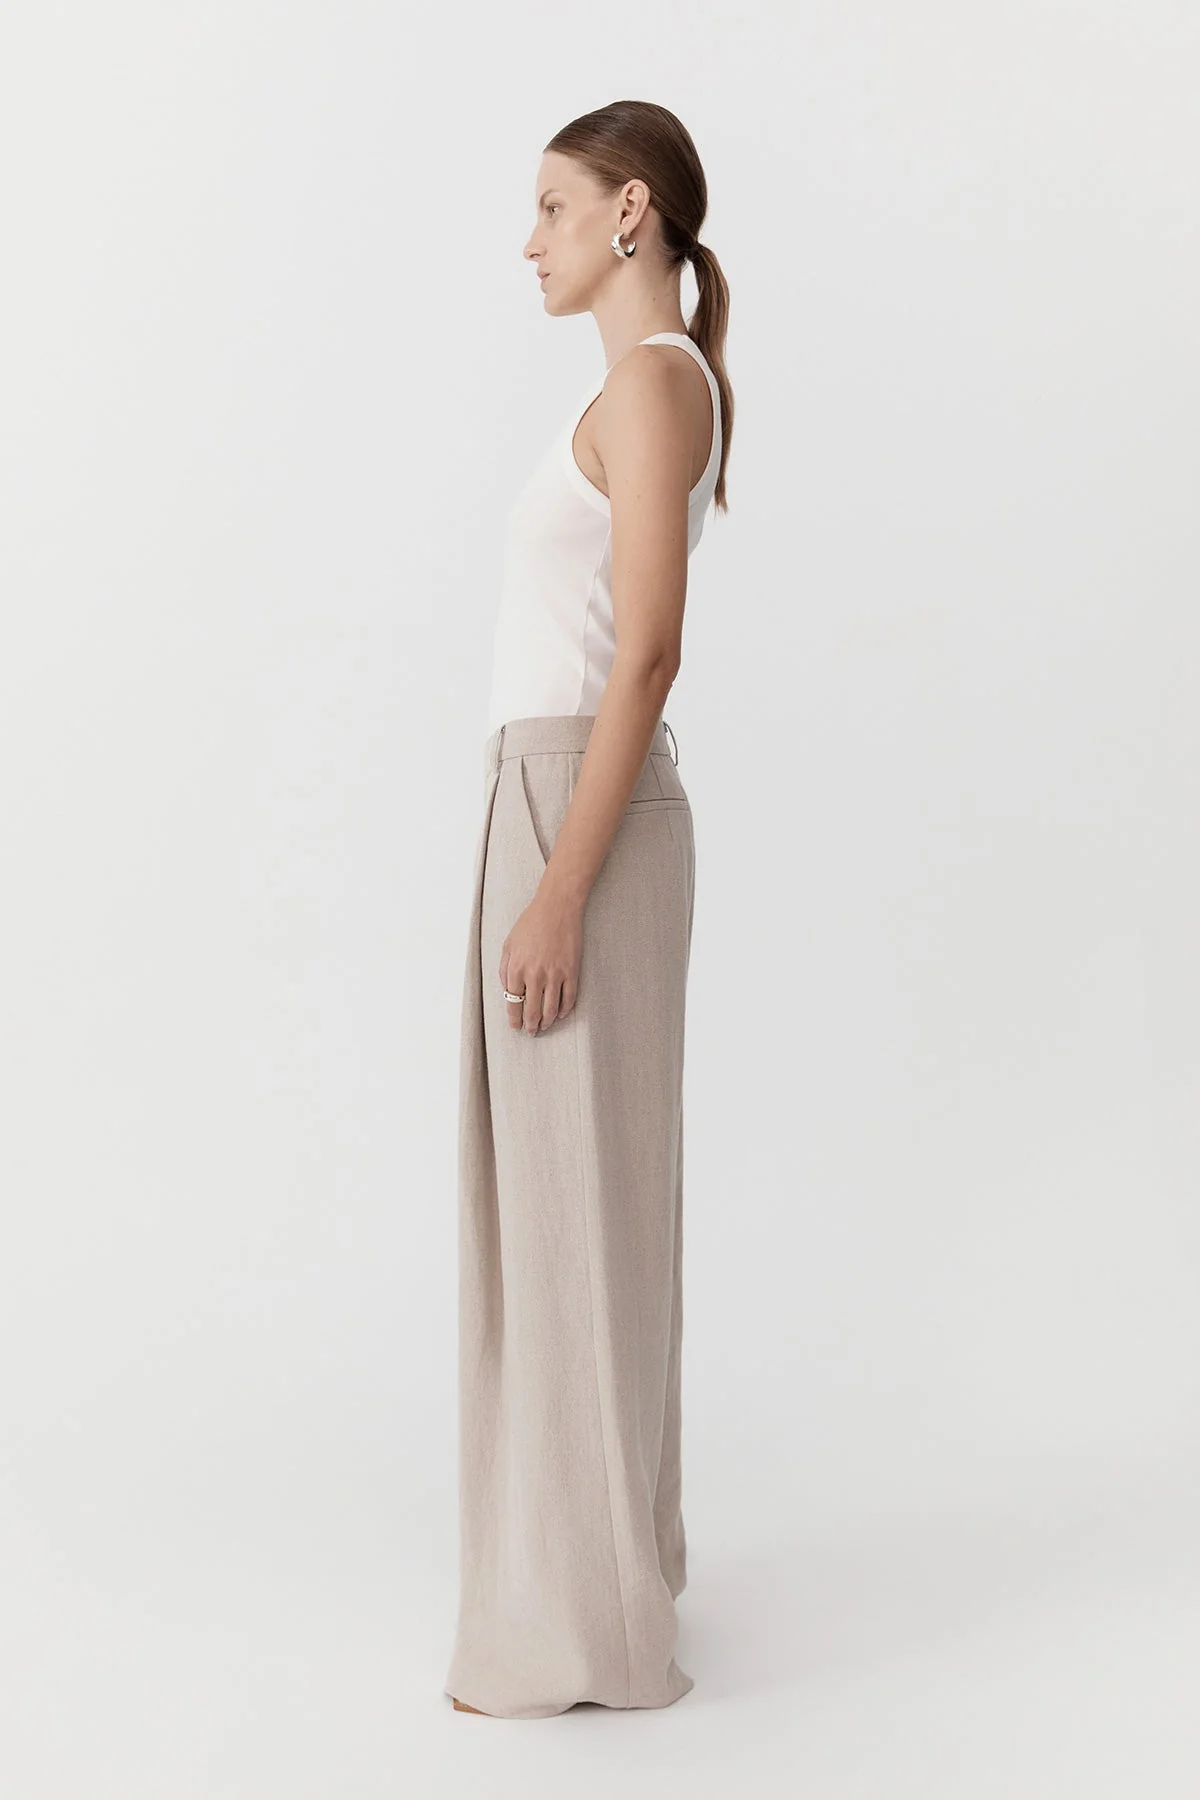 St Agni Linen Overlap Trouser in Natural available at The New Trend Australia.